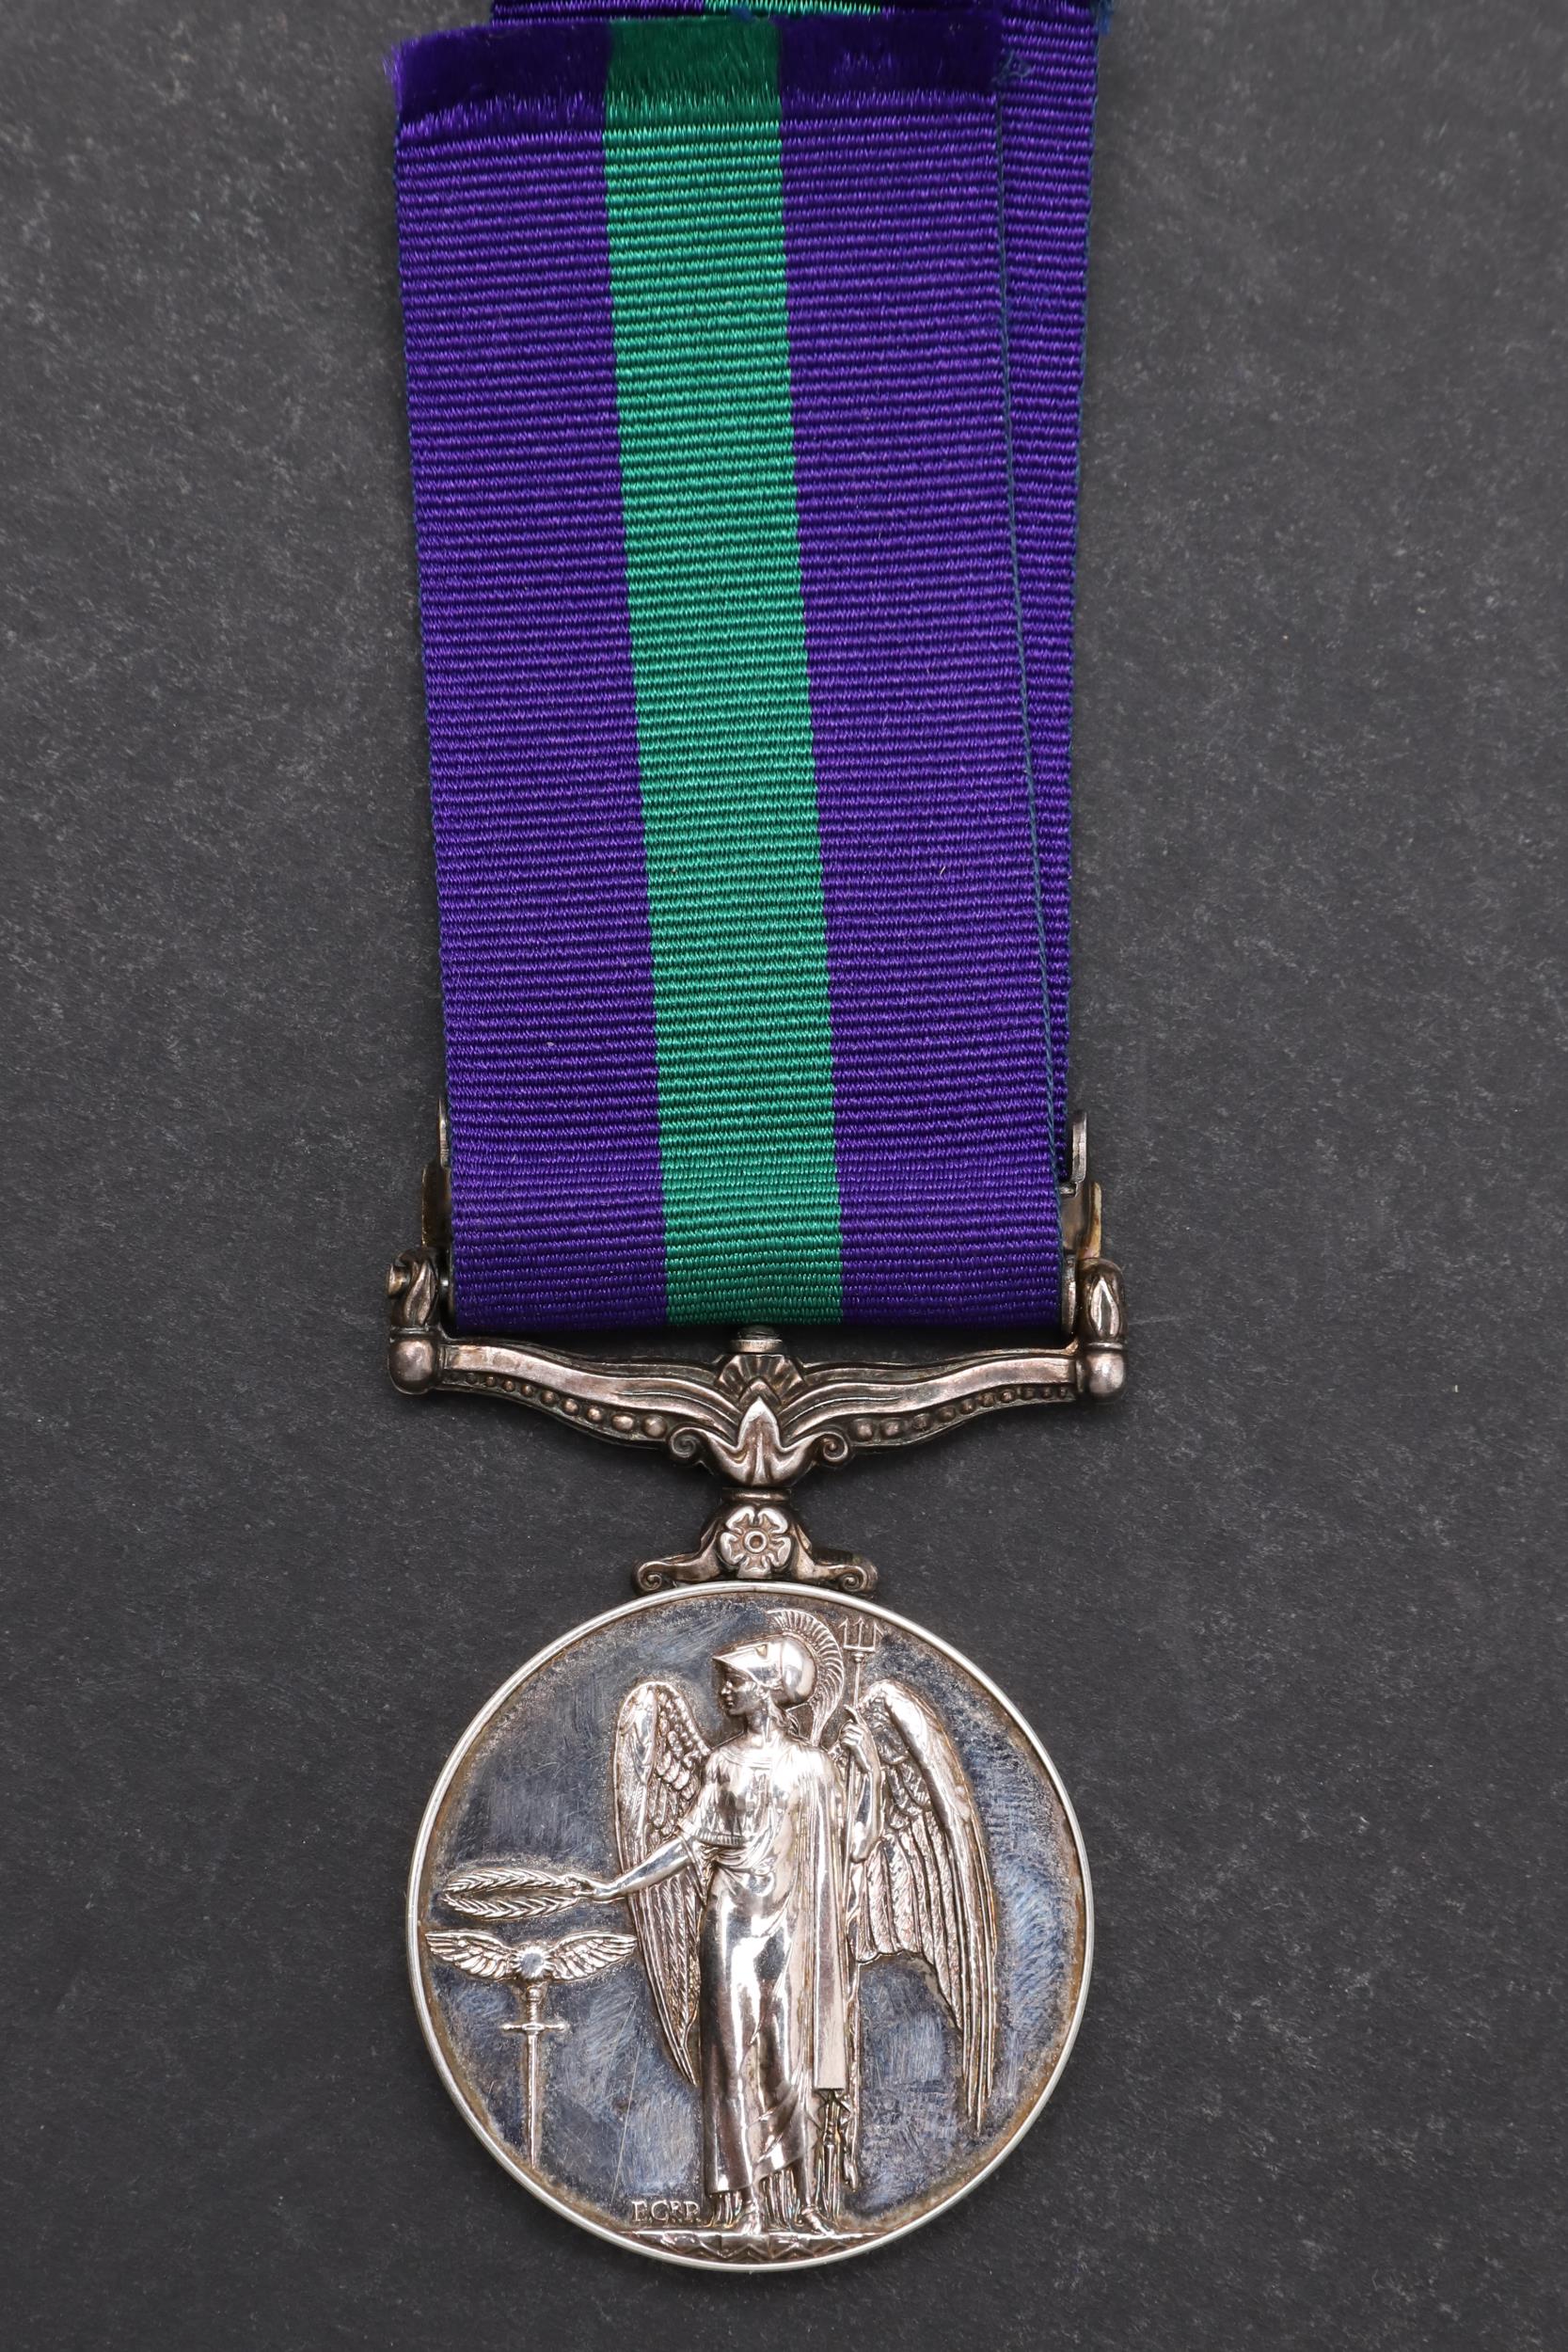 A GENERAL SERVICE MEDAL WITH CANAL ZONE CLASP TO THE SERVICE CORPS. - Image 3 of 6